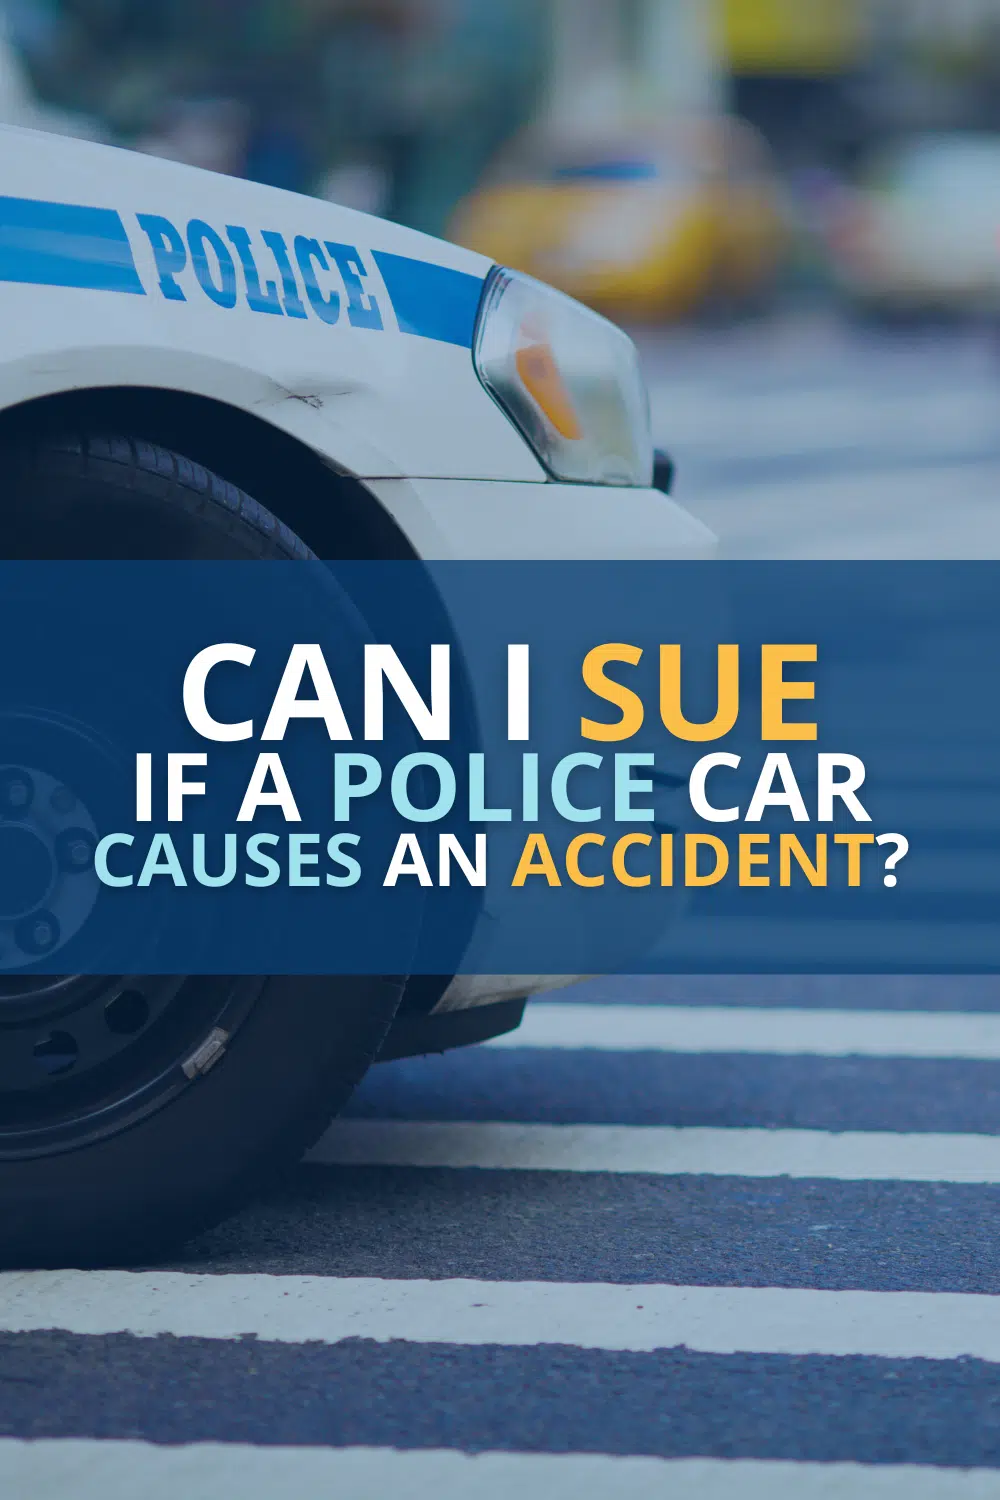 Police Car Causes Accident In Michigan: Can I Sue?